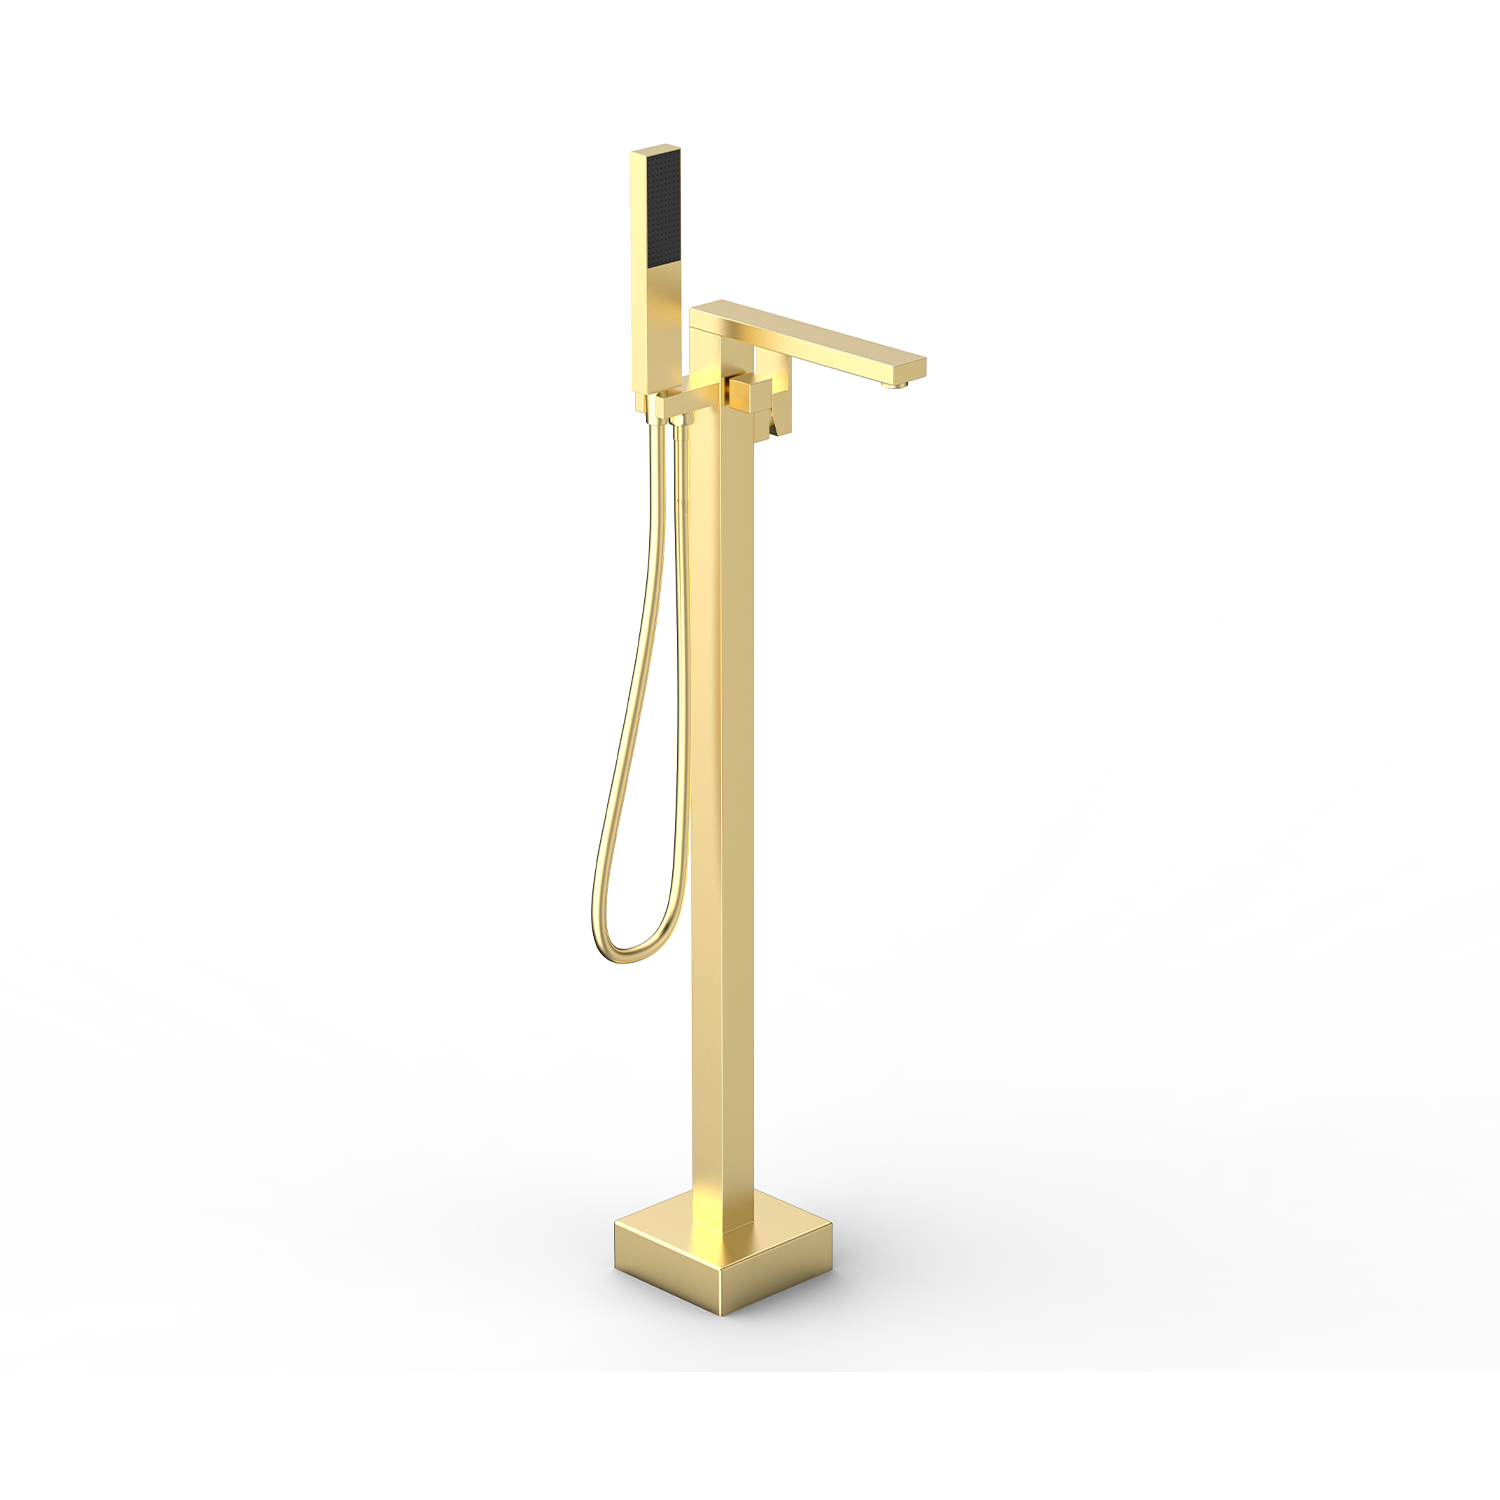 DAX Freestanding Tub Filler with Hand Shower and Square Spout Brushed Gold Finish (DAX-8833-BG)